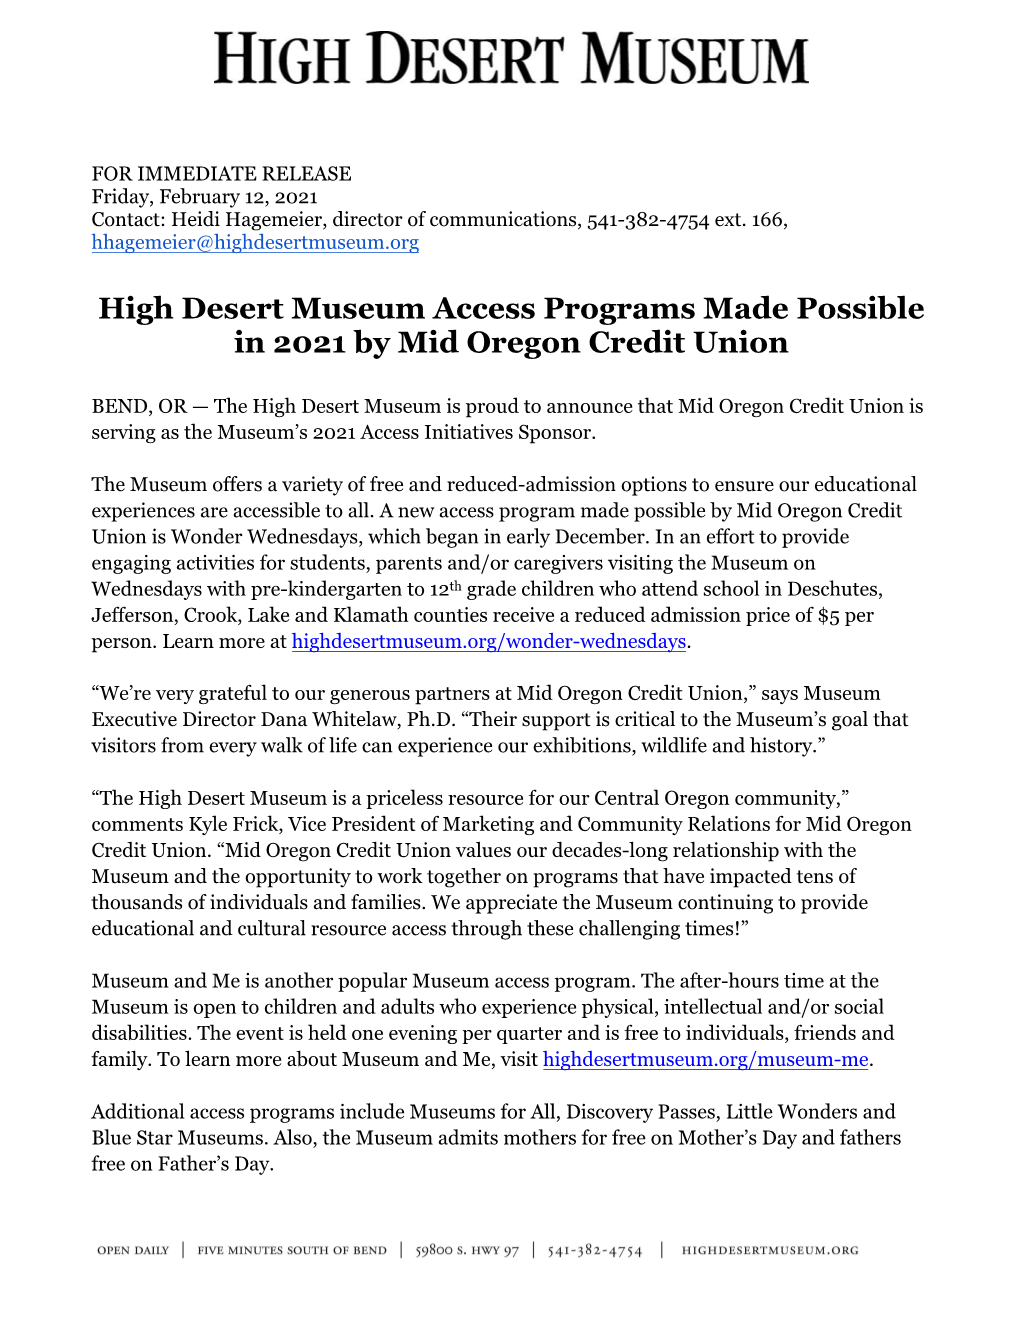 High Desert Museum Access Programs Made Possible in 2021 by Mid Oregon Credit Union